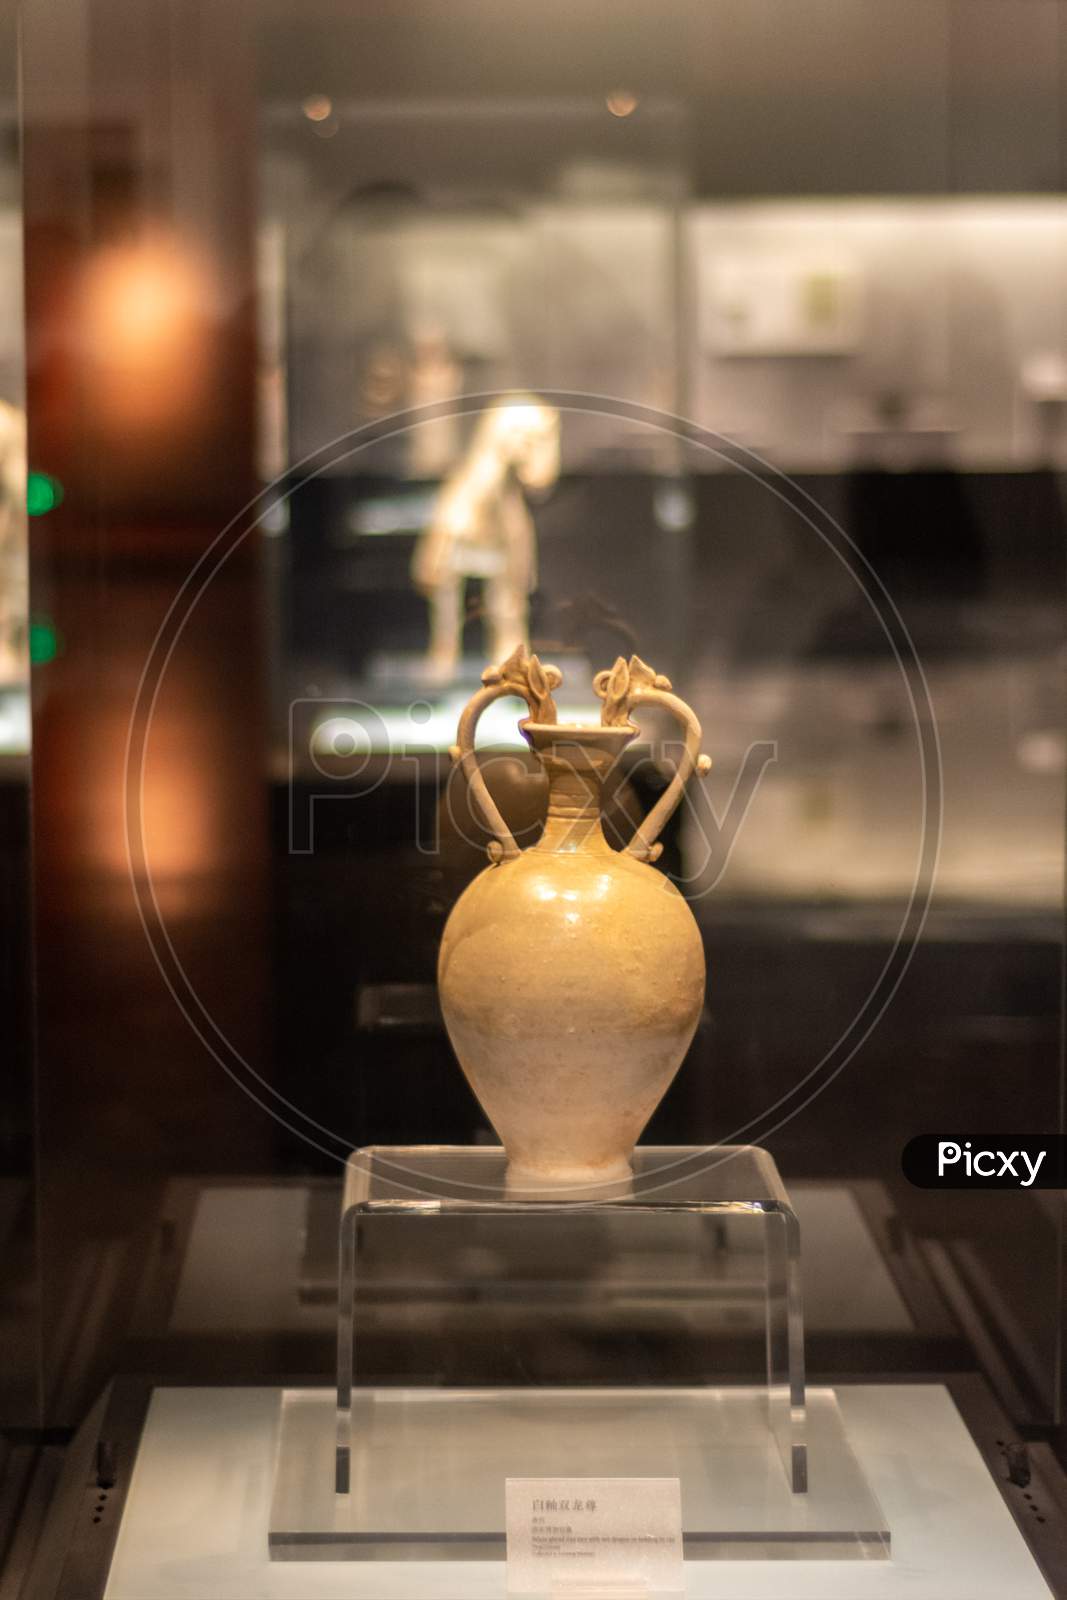 Ancient Chinese Pottery Vase Exhibited In Luoyang Museum In Luoyang, China